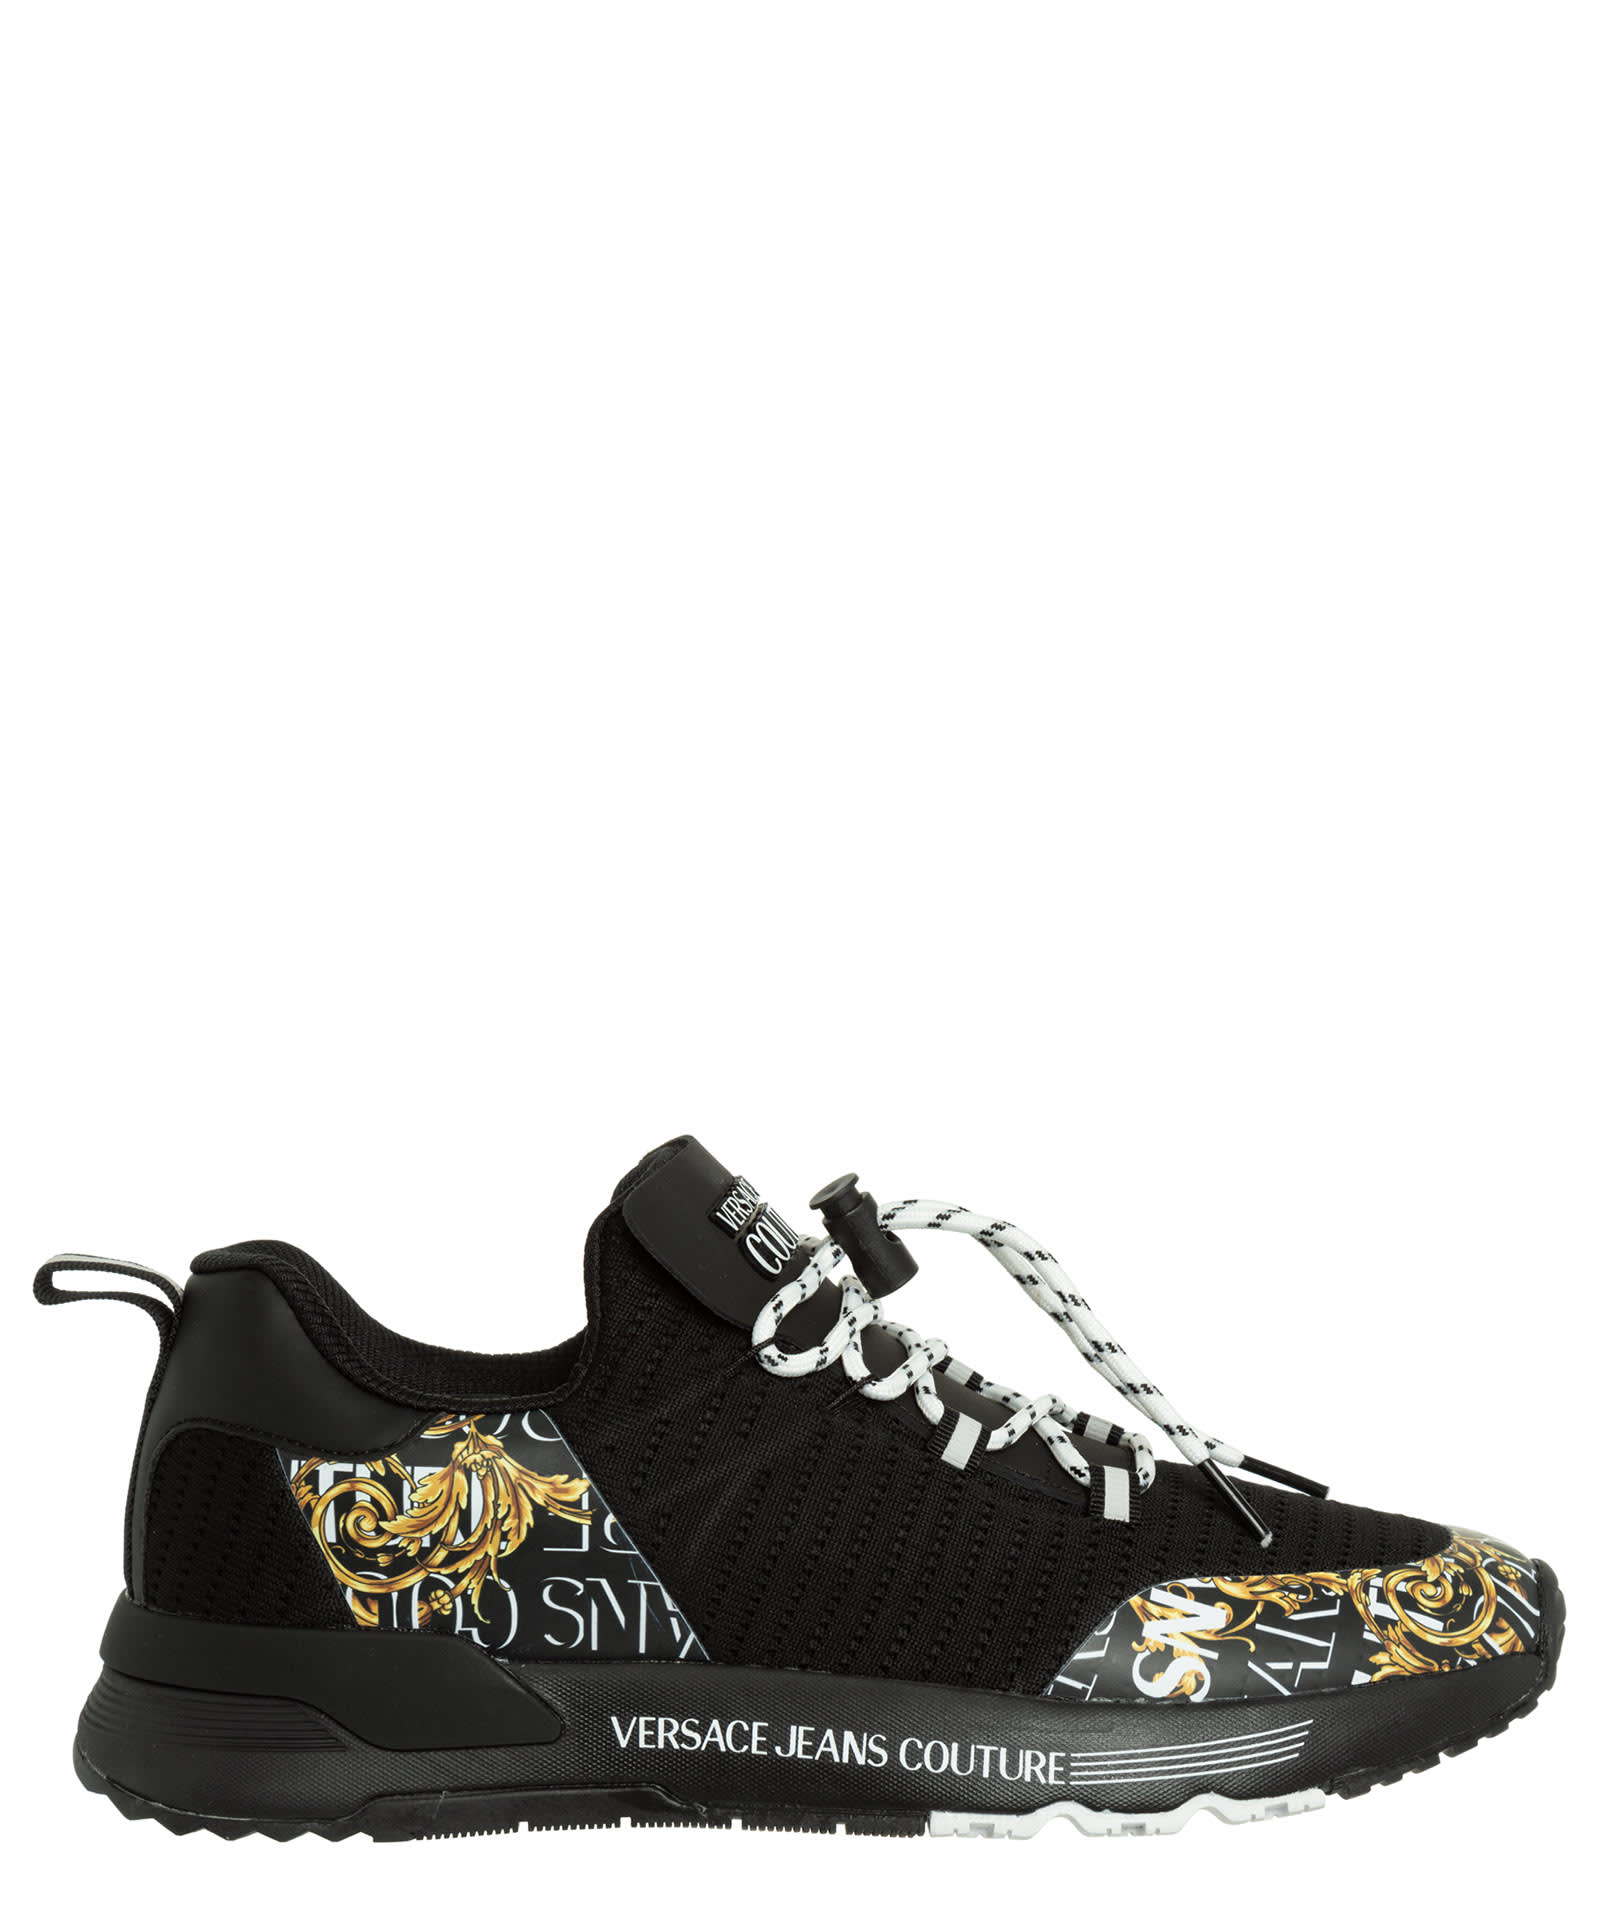 VERSACE JEANS COUTURE DYNAMIC LOGO COUTURE LEATHER SNEAKERS